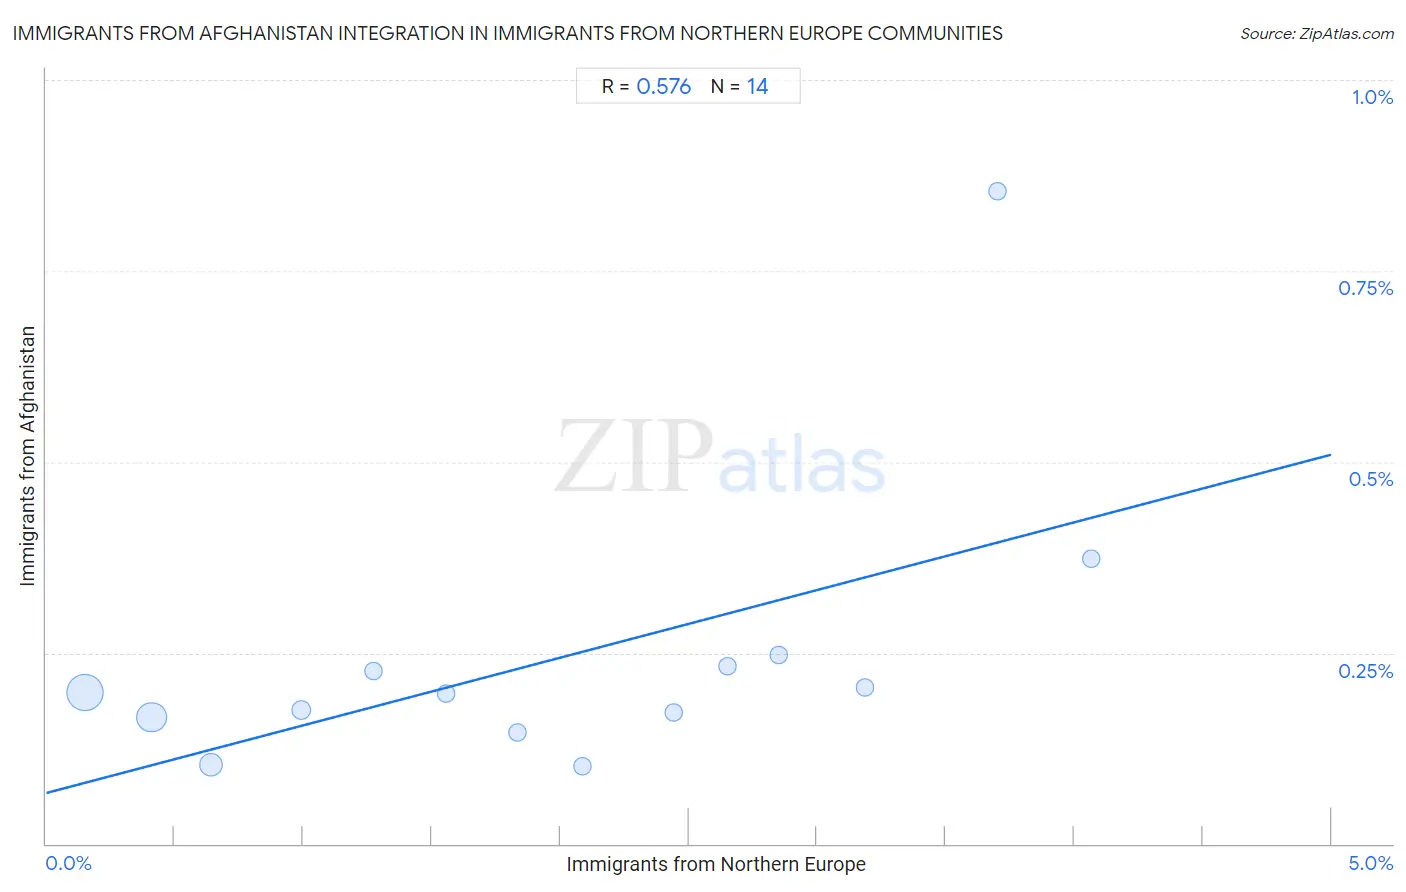 Immigrants from Northern Europe Integration in Immigrants from Afghanistan Communities